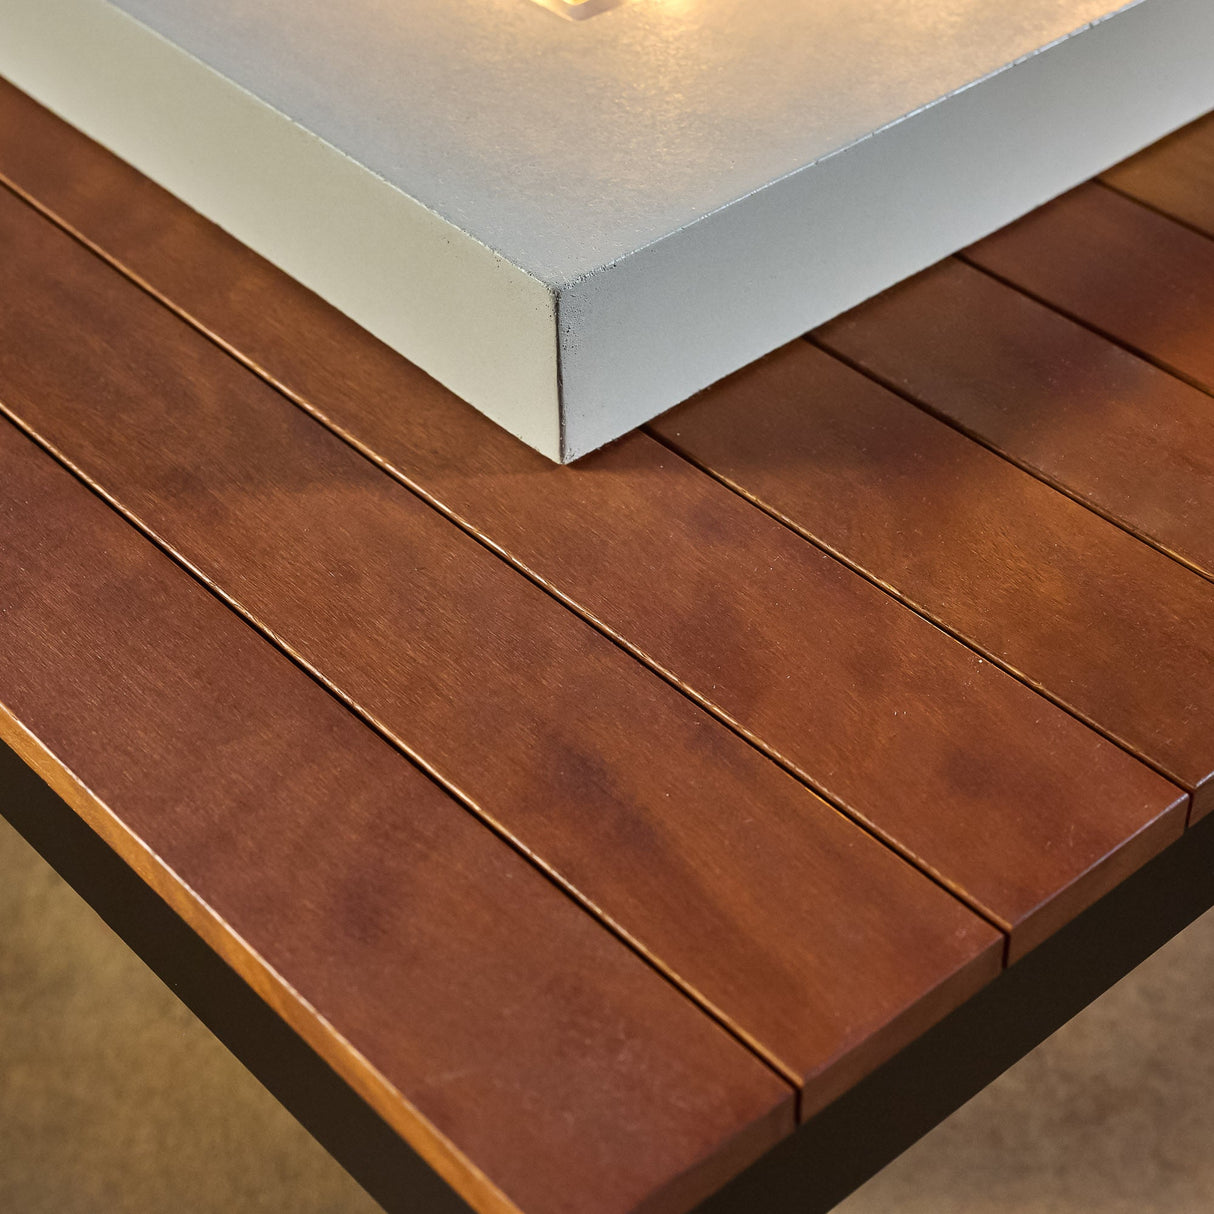 A close up view of the Iroko wood used on the Uptown Iroko Linear Gas Fire Pit Table